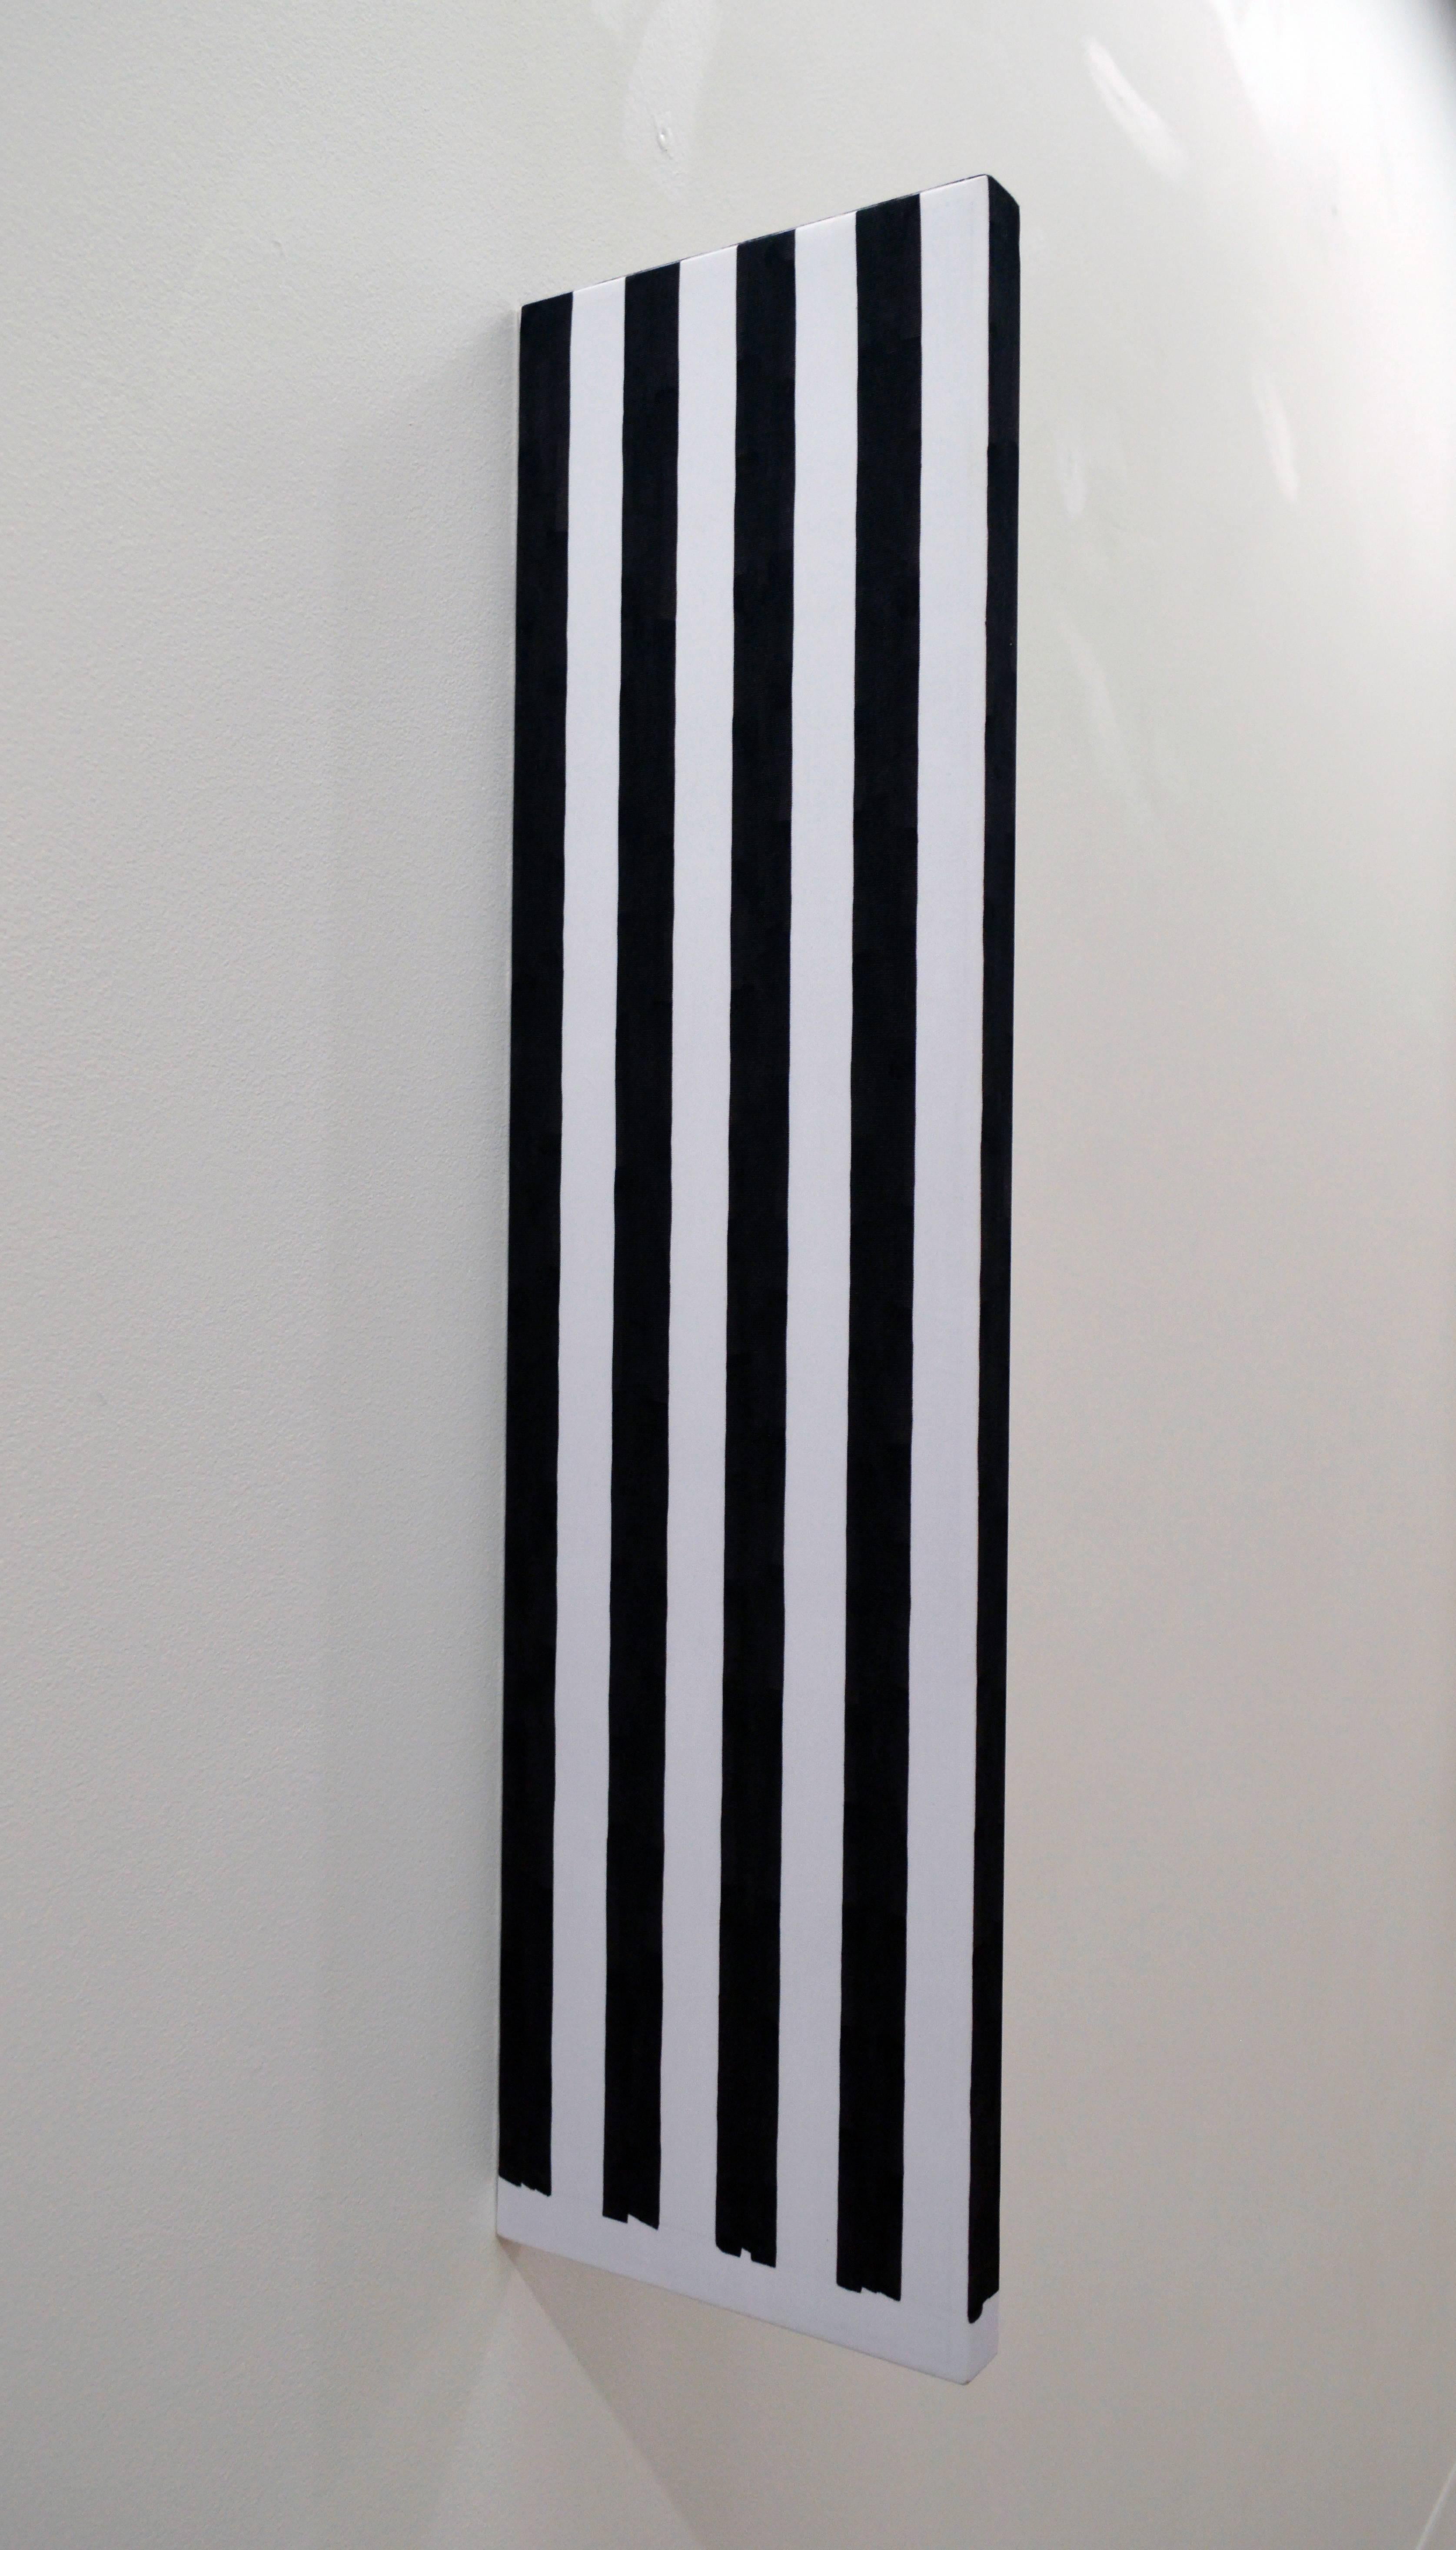 Abstract Sculpture Lyn Carter - Stripes 2